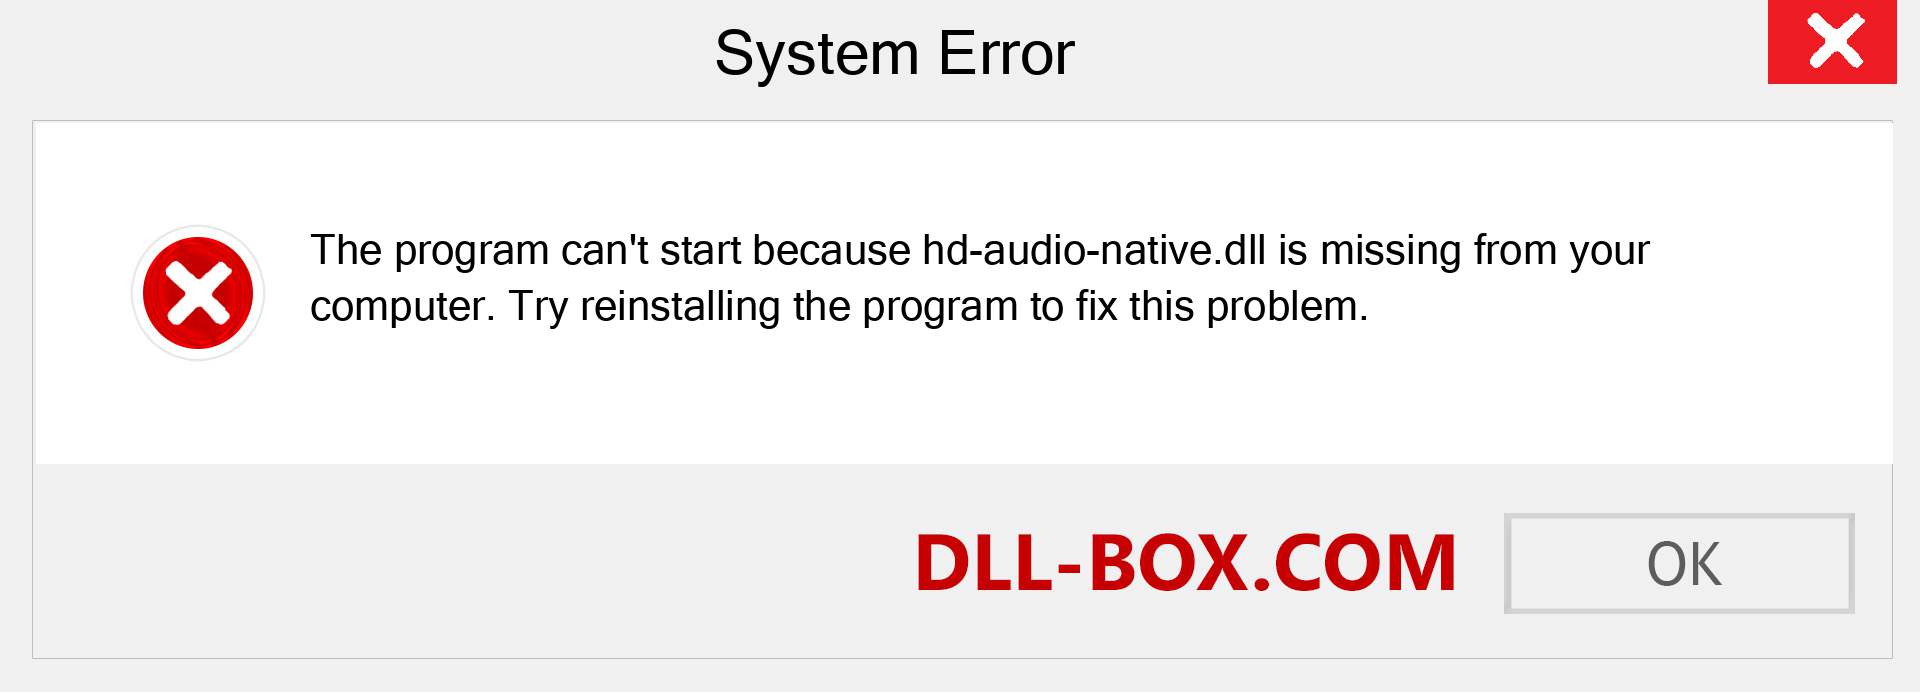  hd-audio-native.dll file is missing?. Download for Windows 7, 8, 10 - Fix  hd-audio-native dll Missing Error on Windows, photos, images